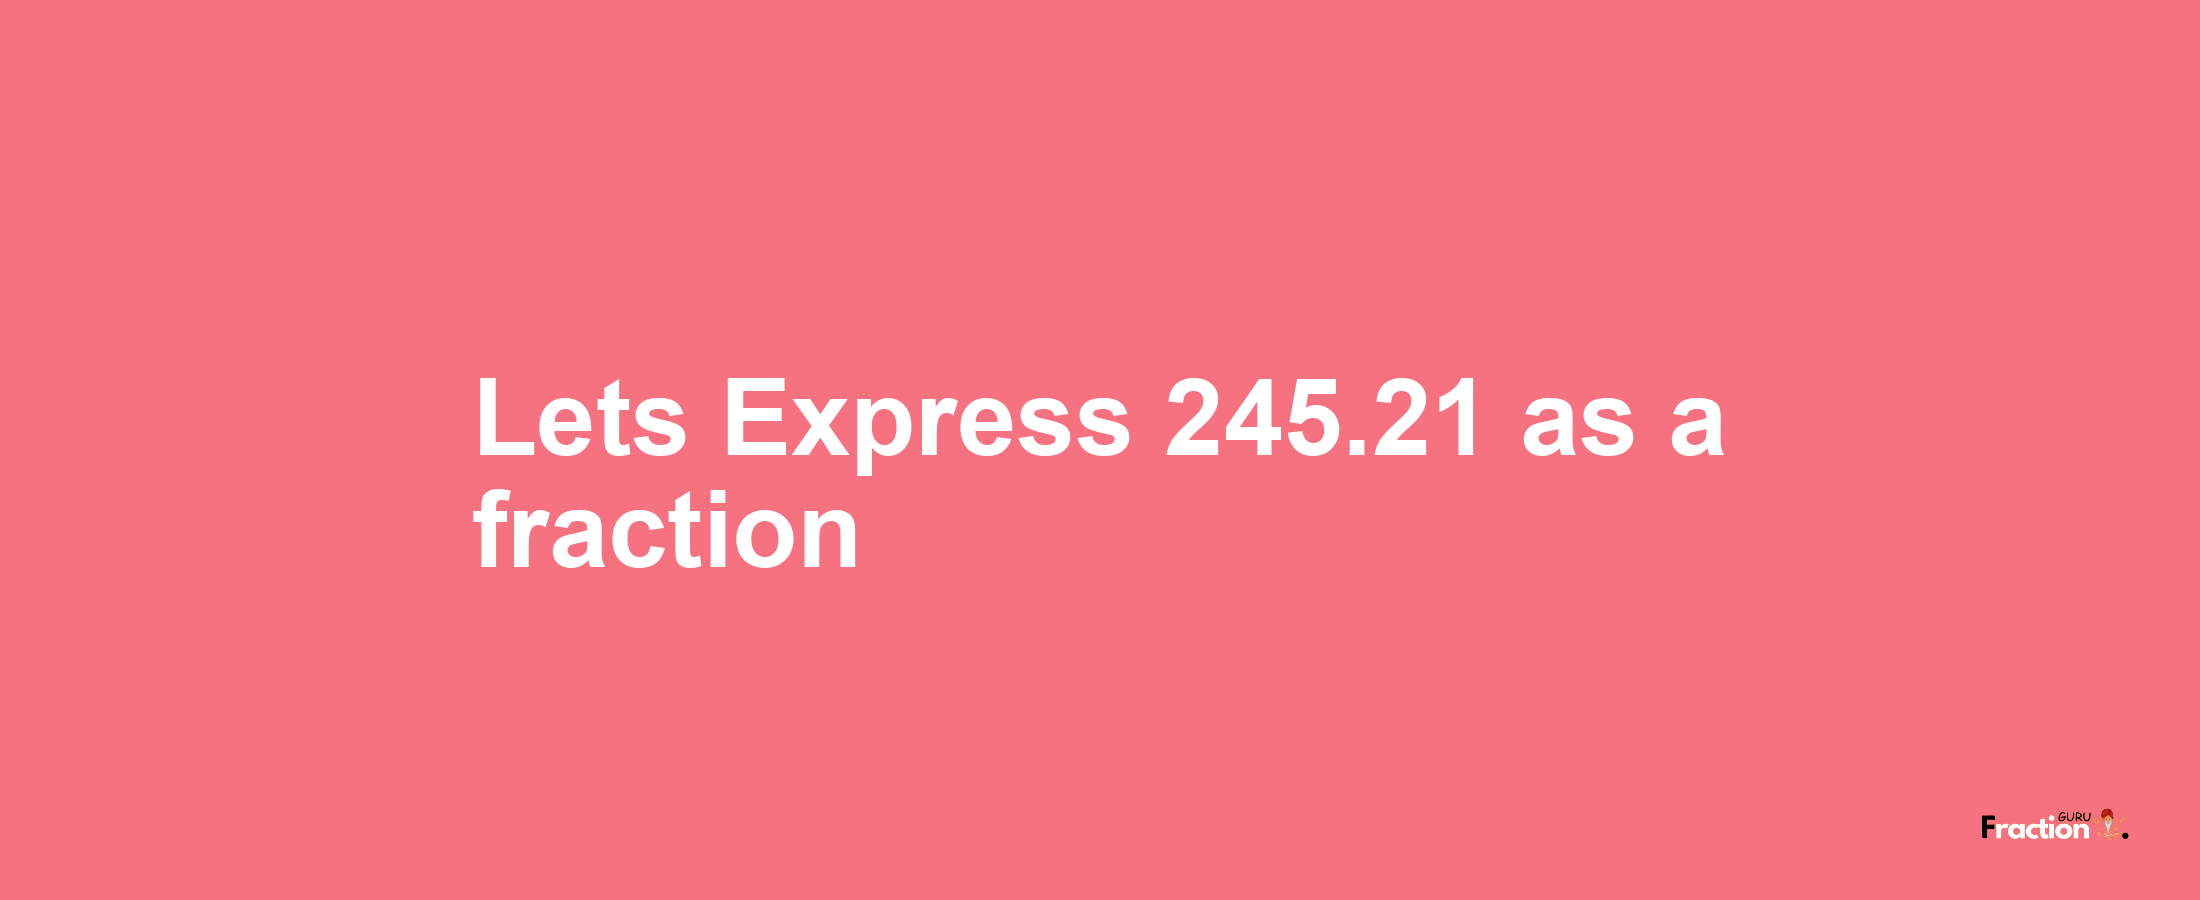 Lets Express 245.21 as afraction